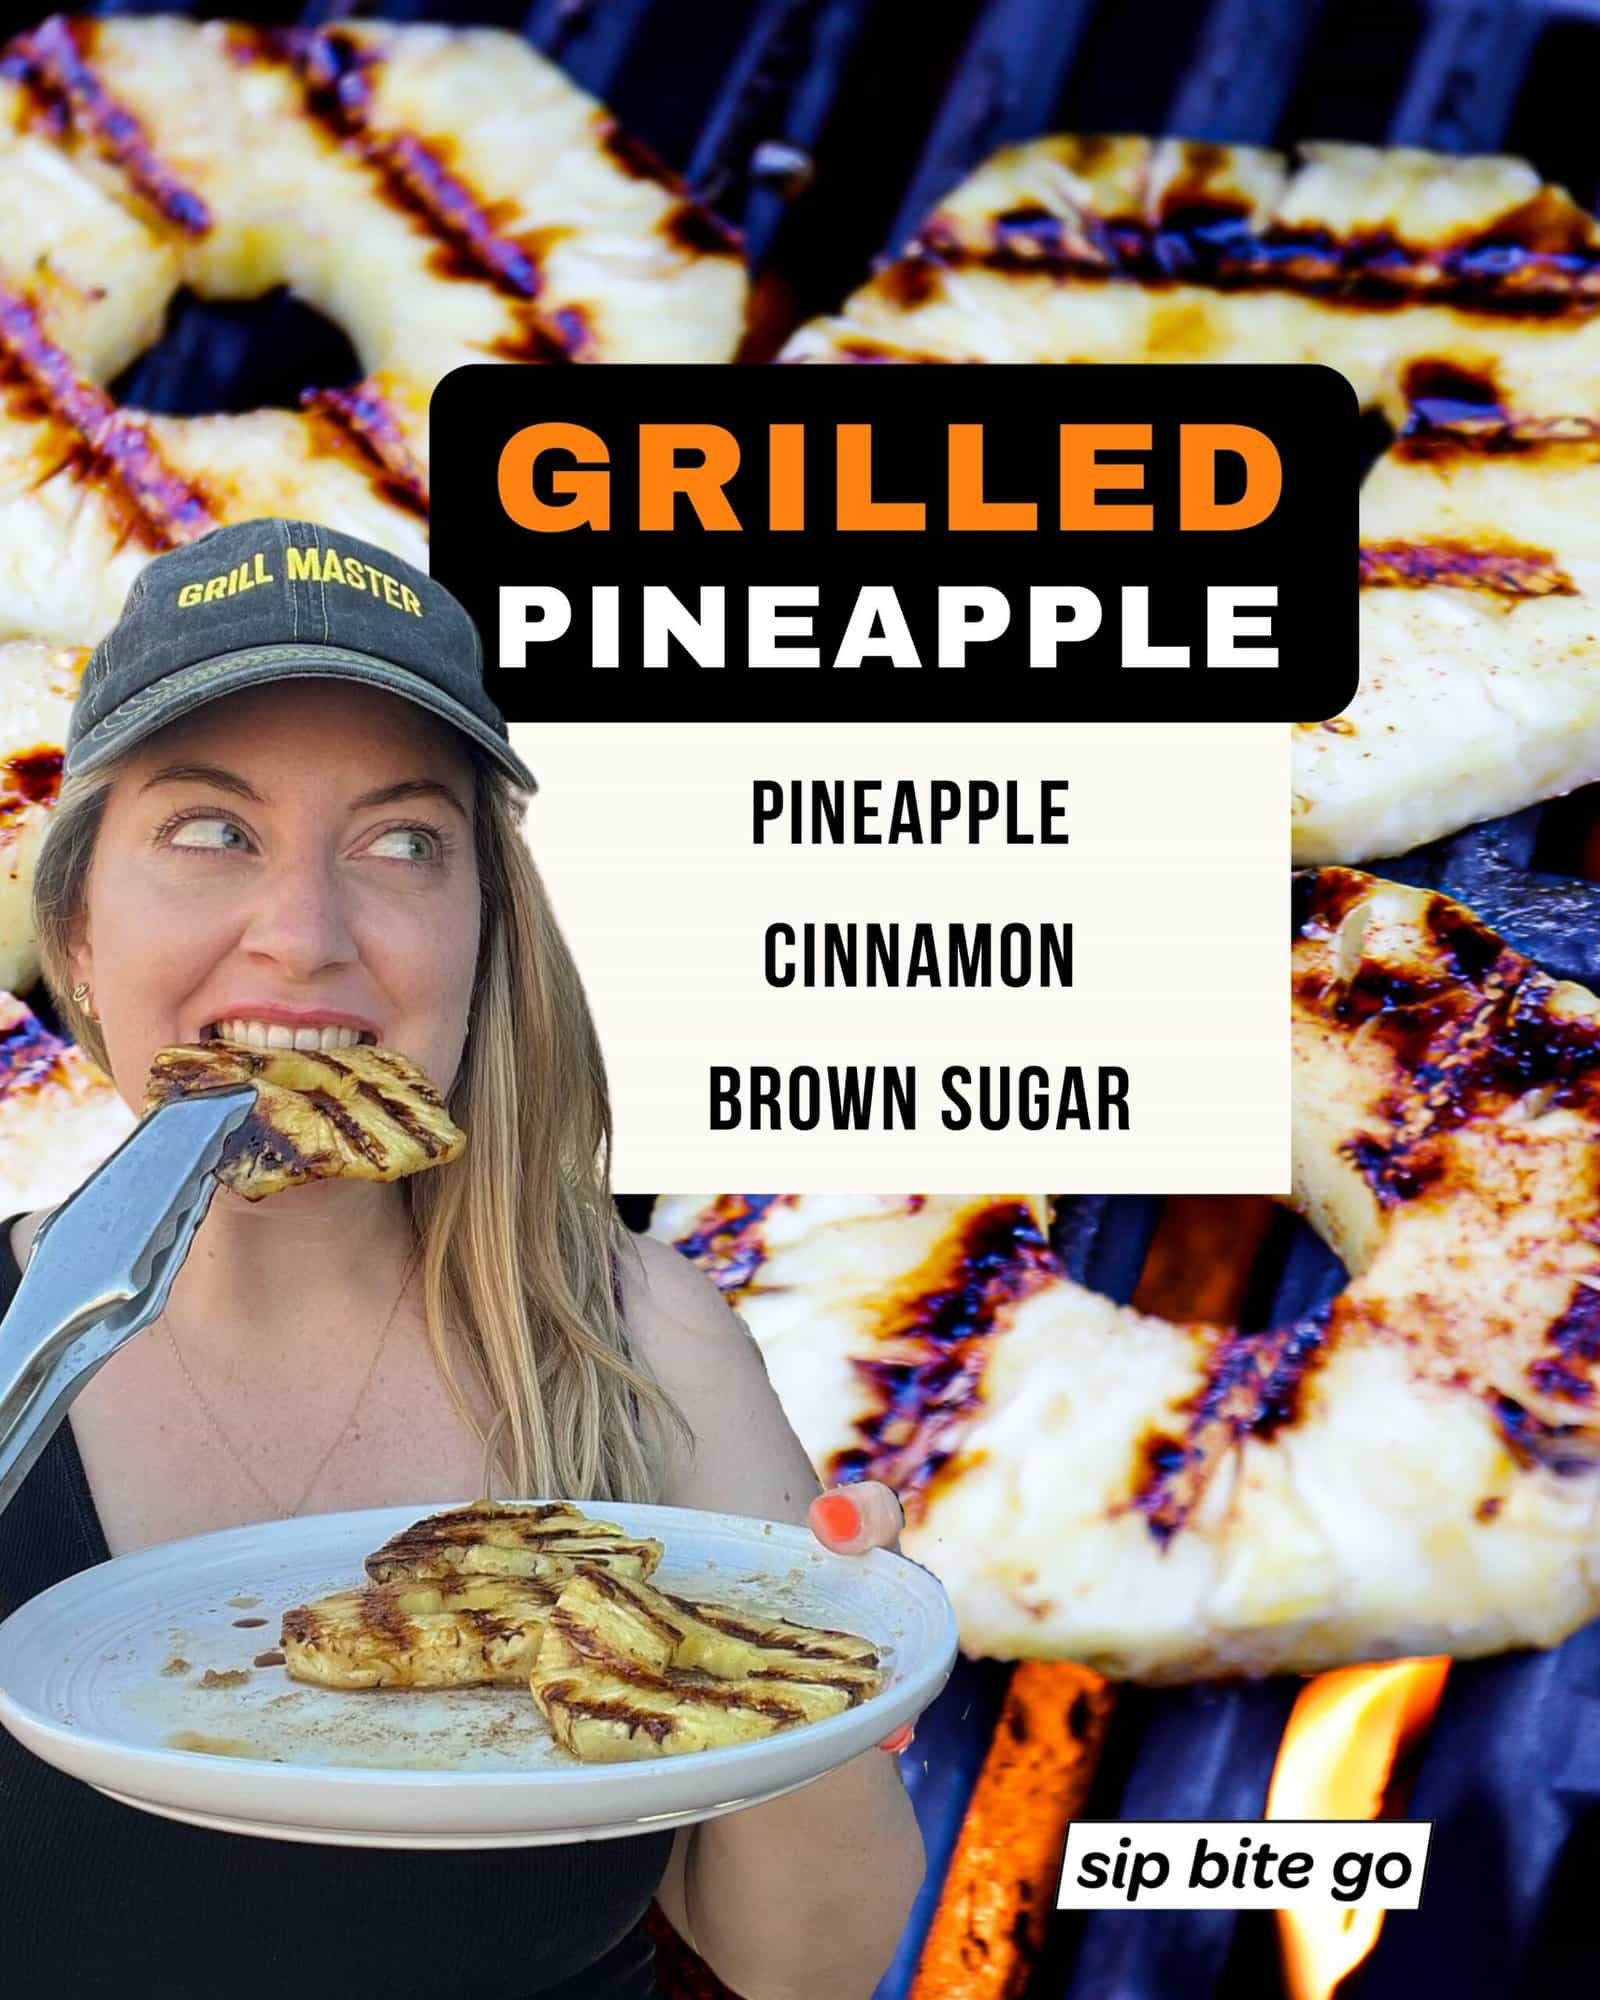 Infographic with ingredients for grilled pineapple recipe with cinnamon and brown sugar